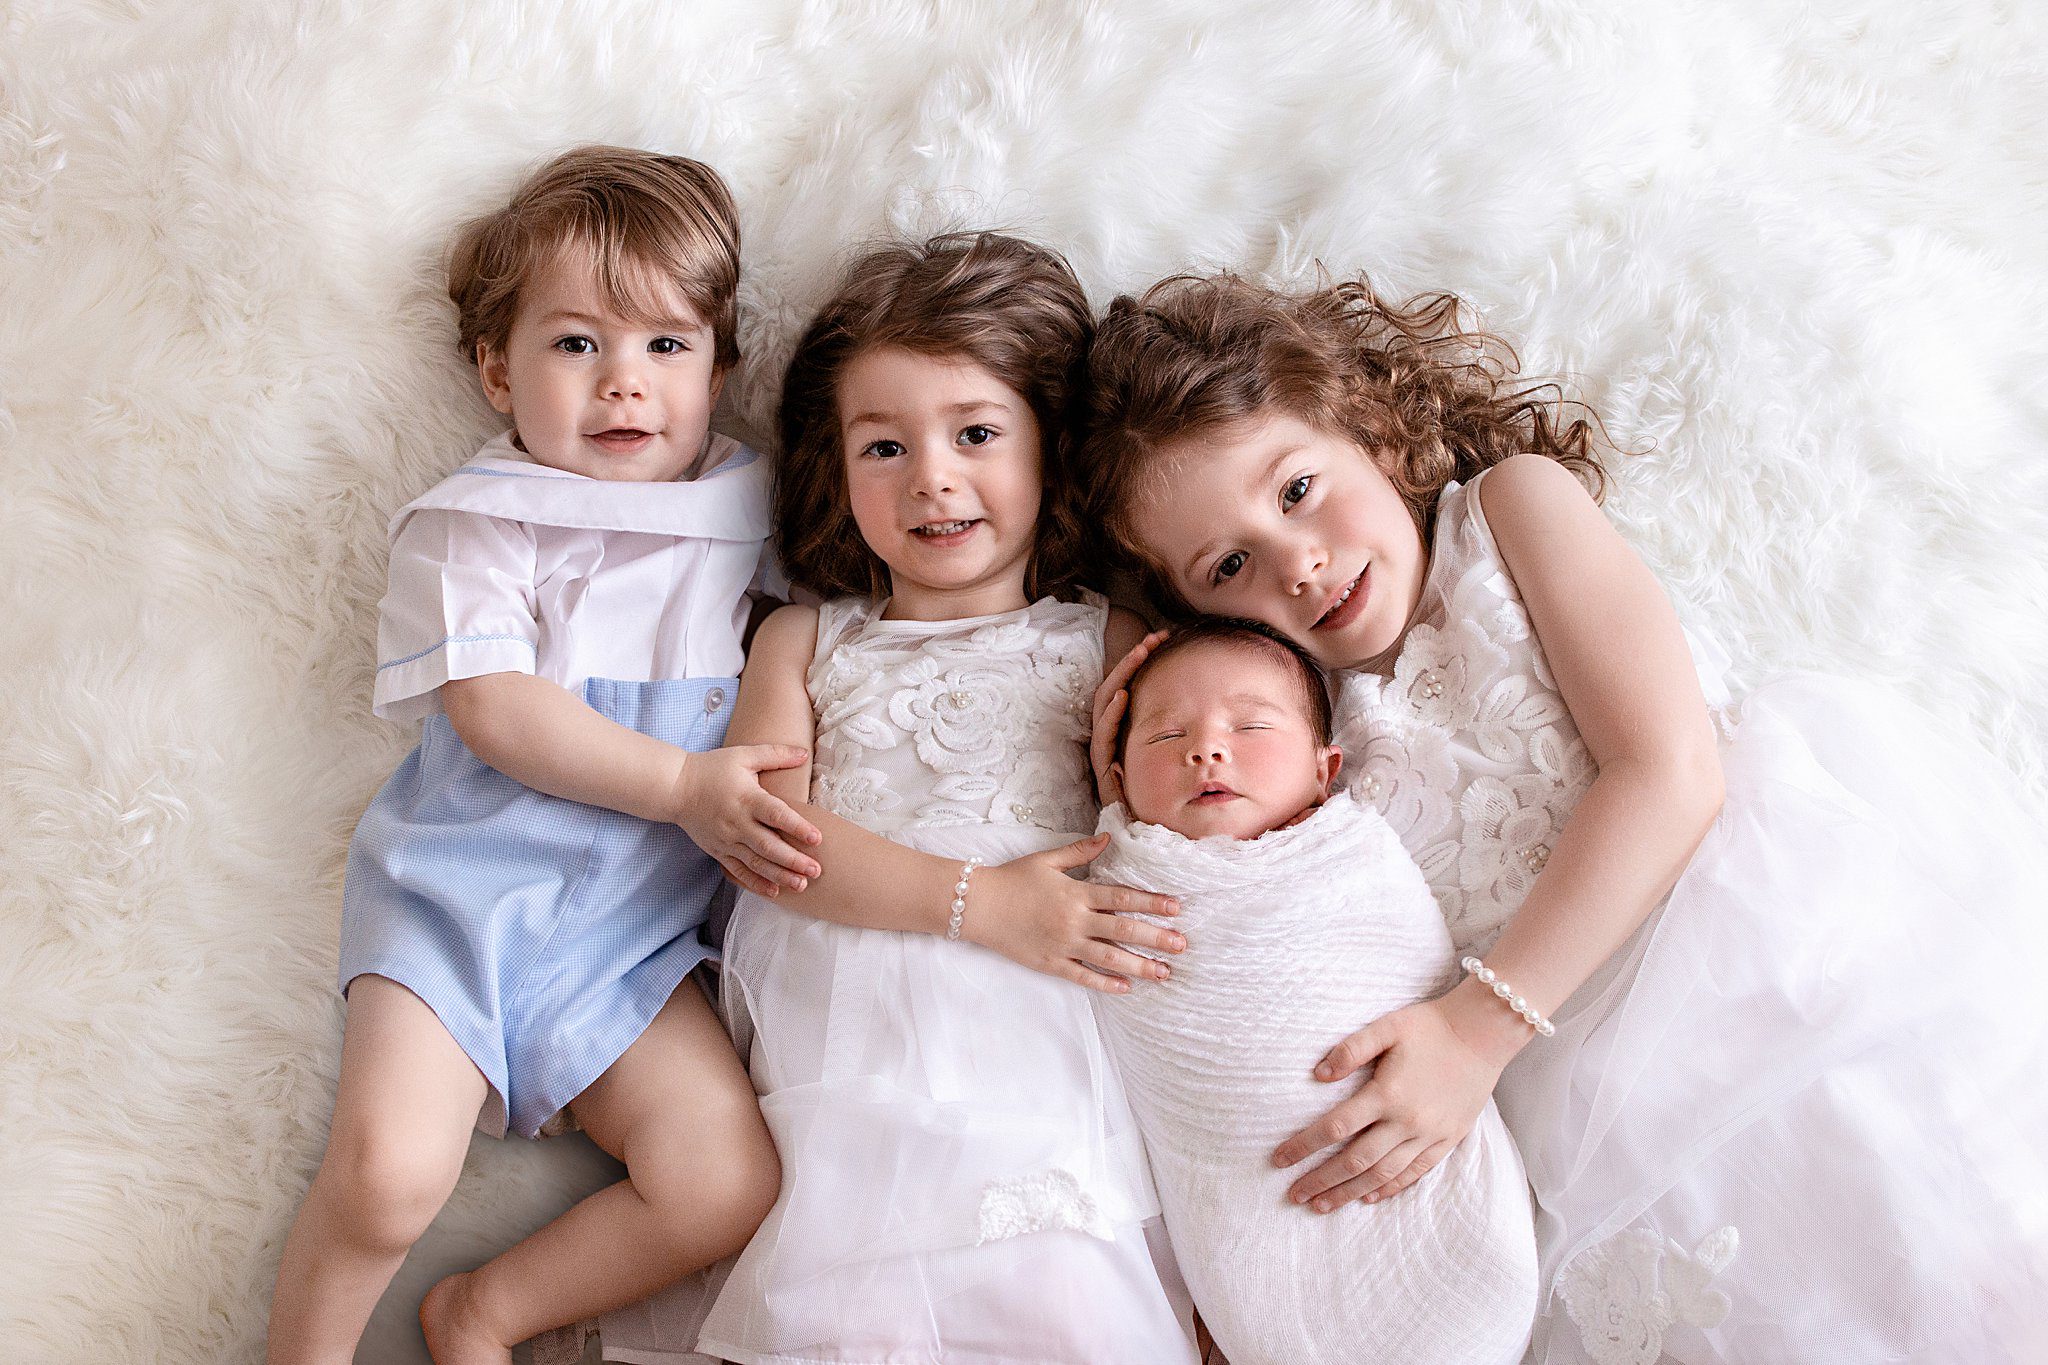 Huntsville newborn photography picture of newborn baby with three older siblings